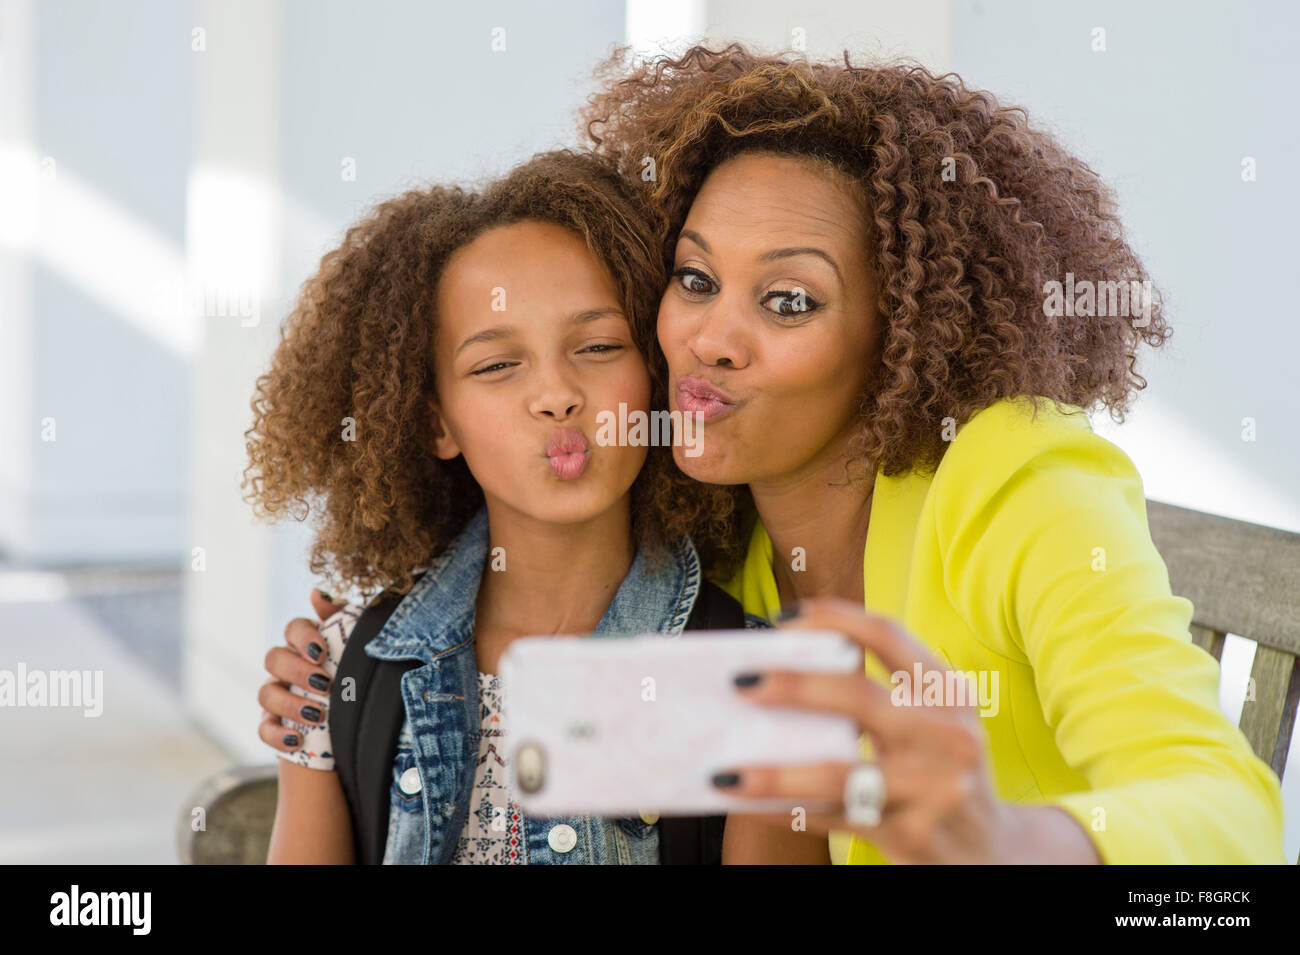 Mixed race mother and daughter taking selfie Stock Photo